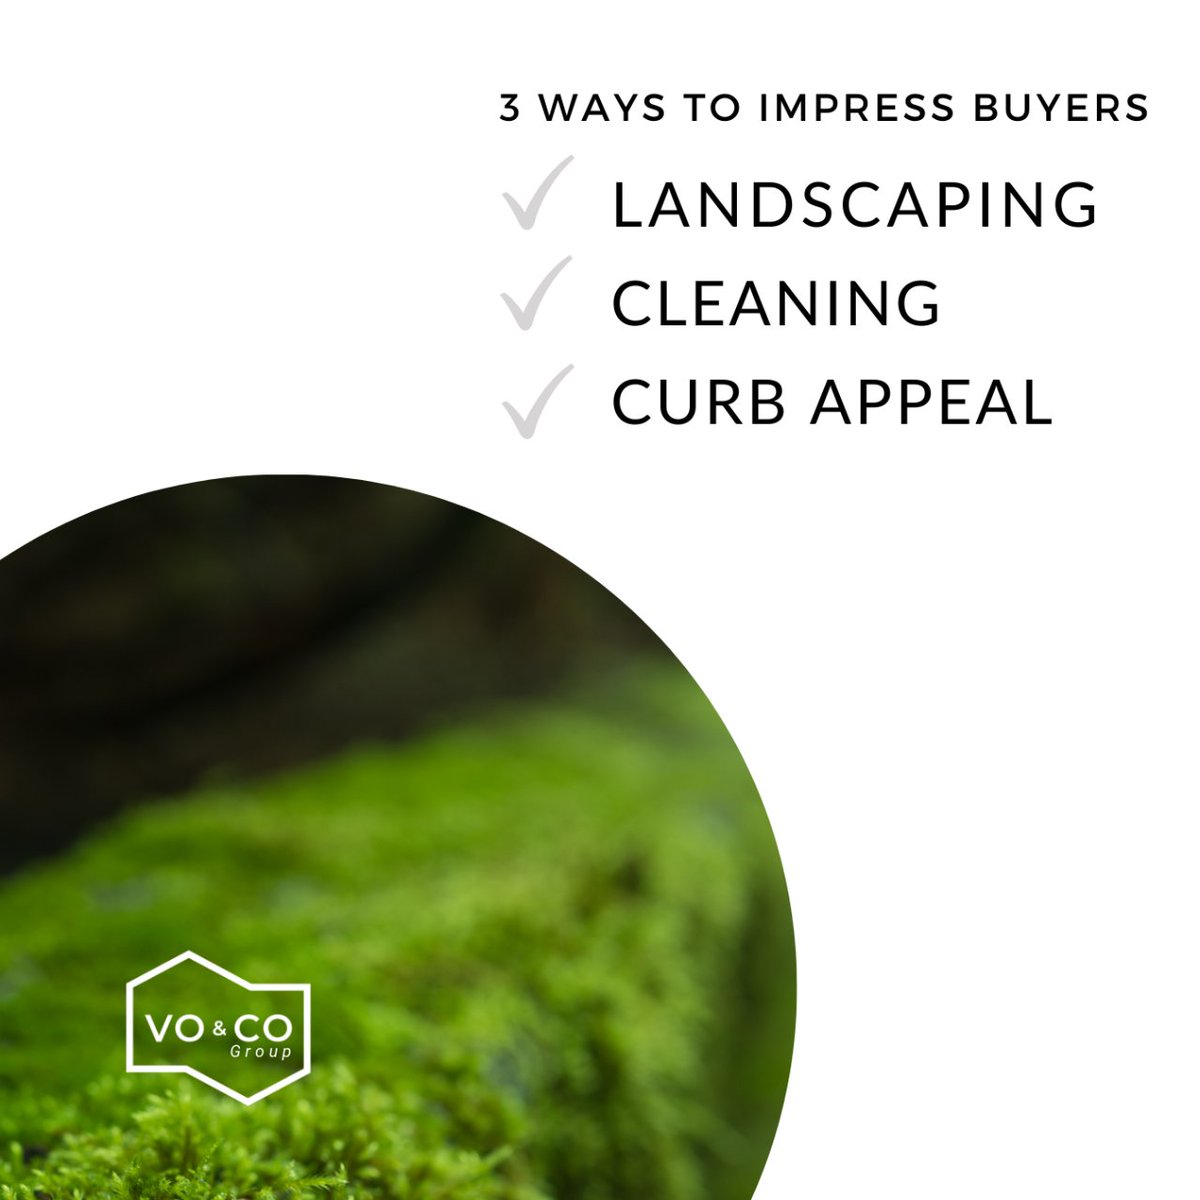 Impress buyers by doing these tips:

Landscaping 
Cleaning
Curb appeal 

Ready to sell? Let's connect! We'd love to help!

Vo & Co. Group

#oregonrealestate #washingtonrealestate